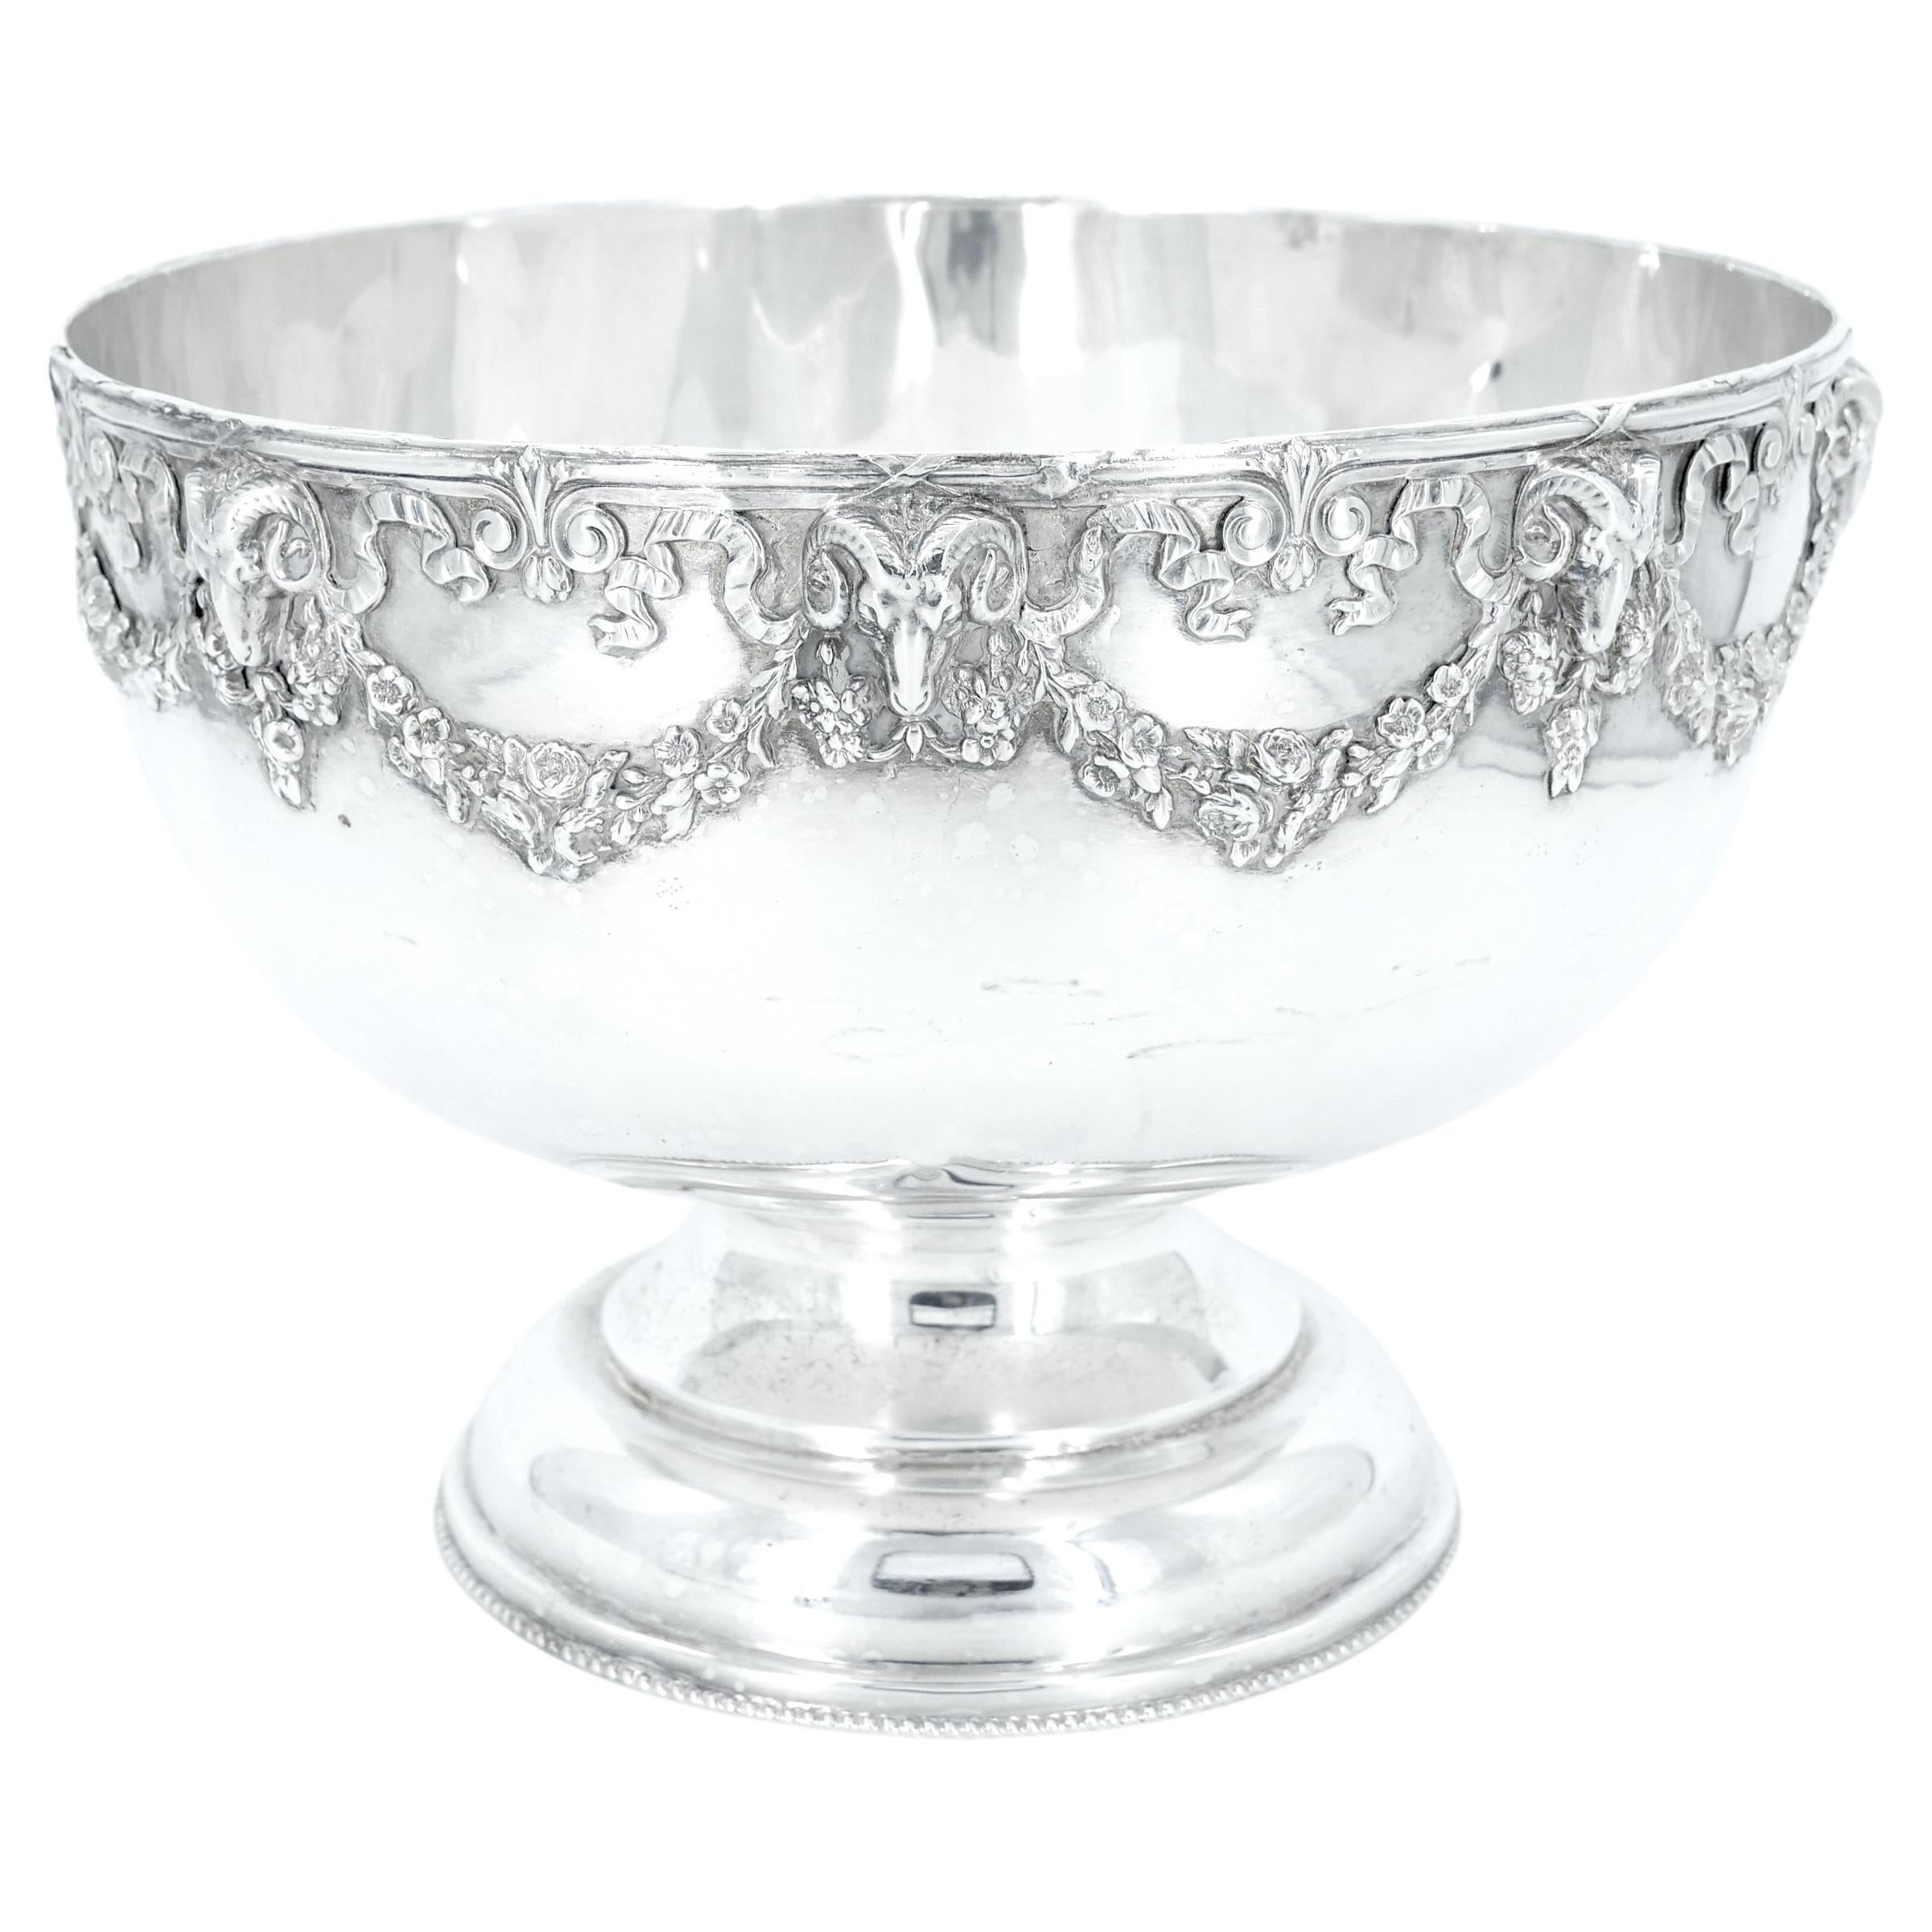 Old EnglishSilver Plate Centerpiece Bowl / Punch Bowl  For Sale